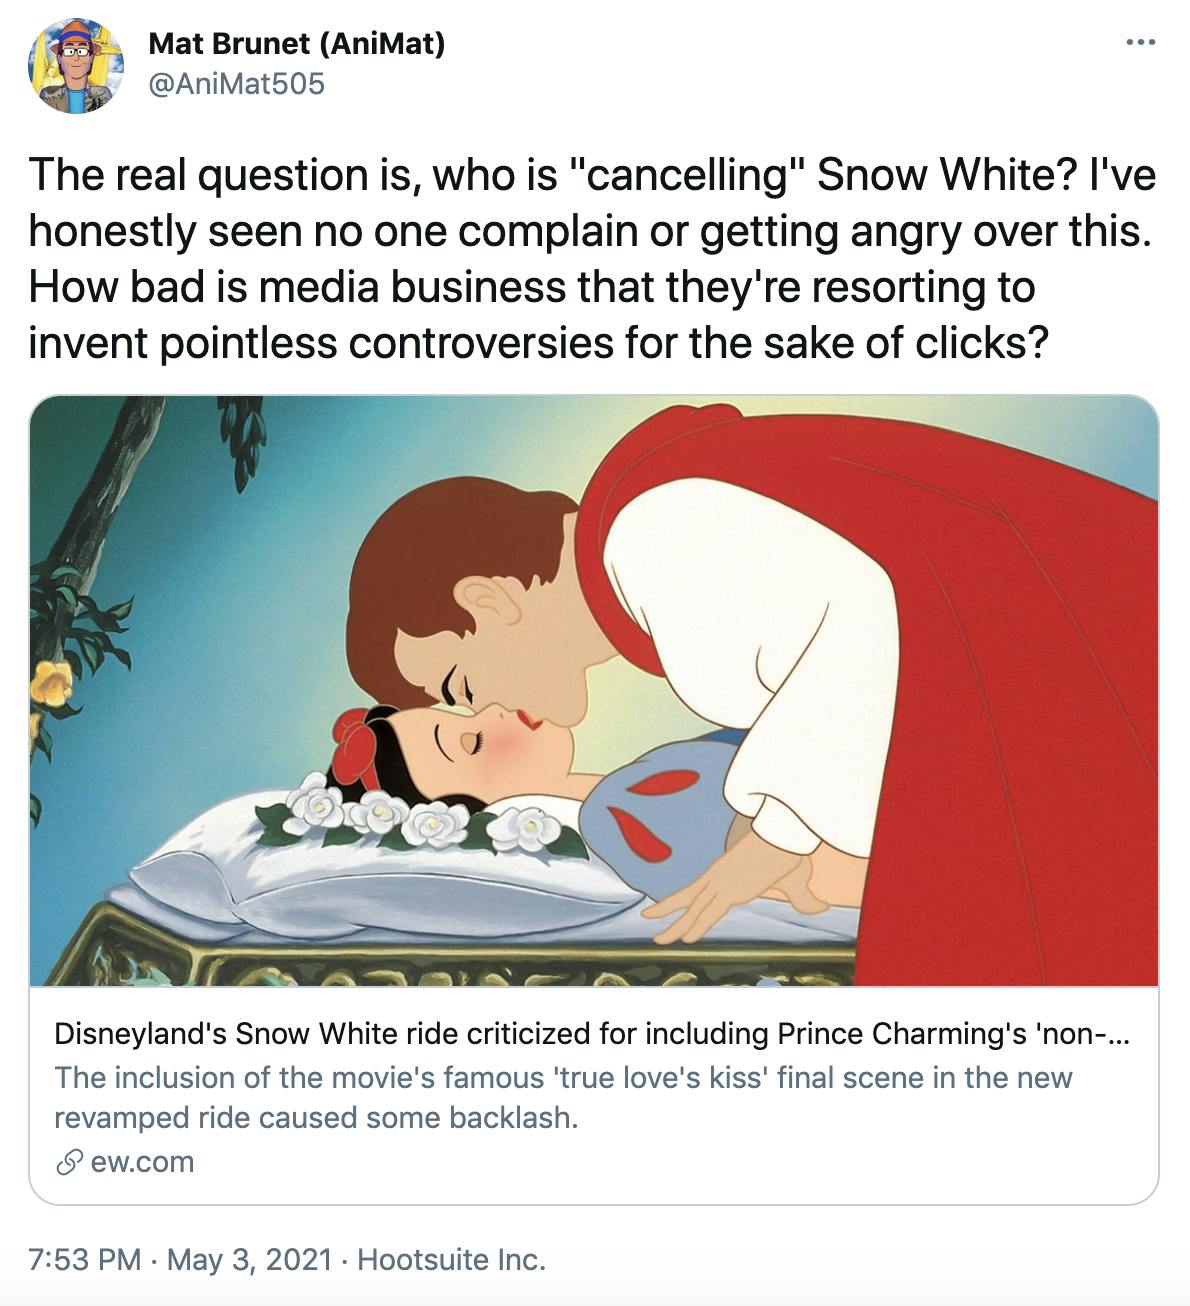 The real question is, who is 'cancelling' Snow White? I've honestly seen no one complain or getting angry over this. How bad is media business that they're resorting to invent pointless controversies for the sake of clicks?